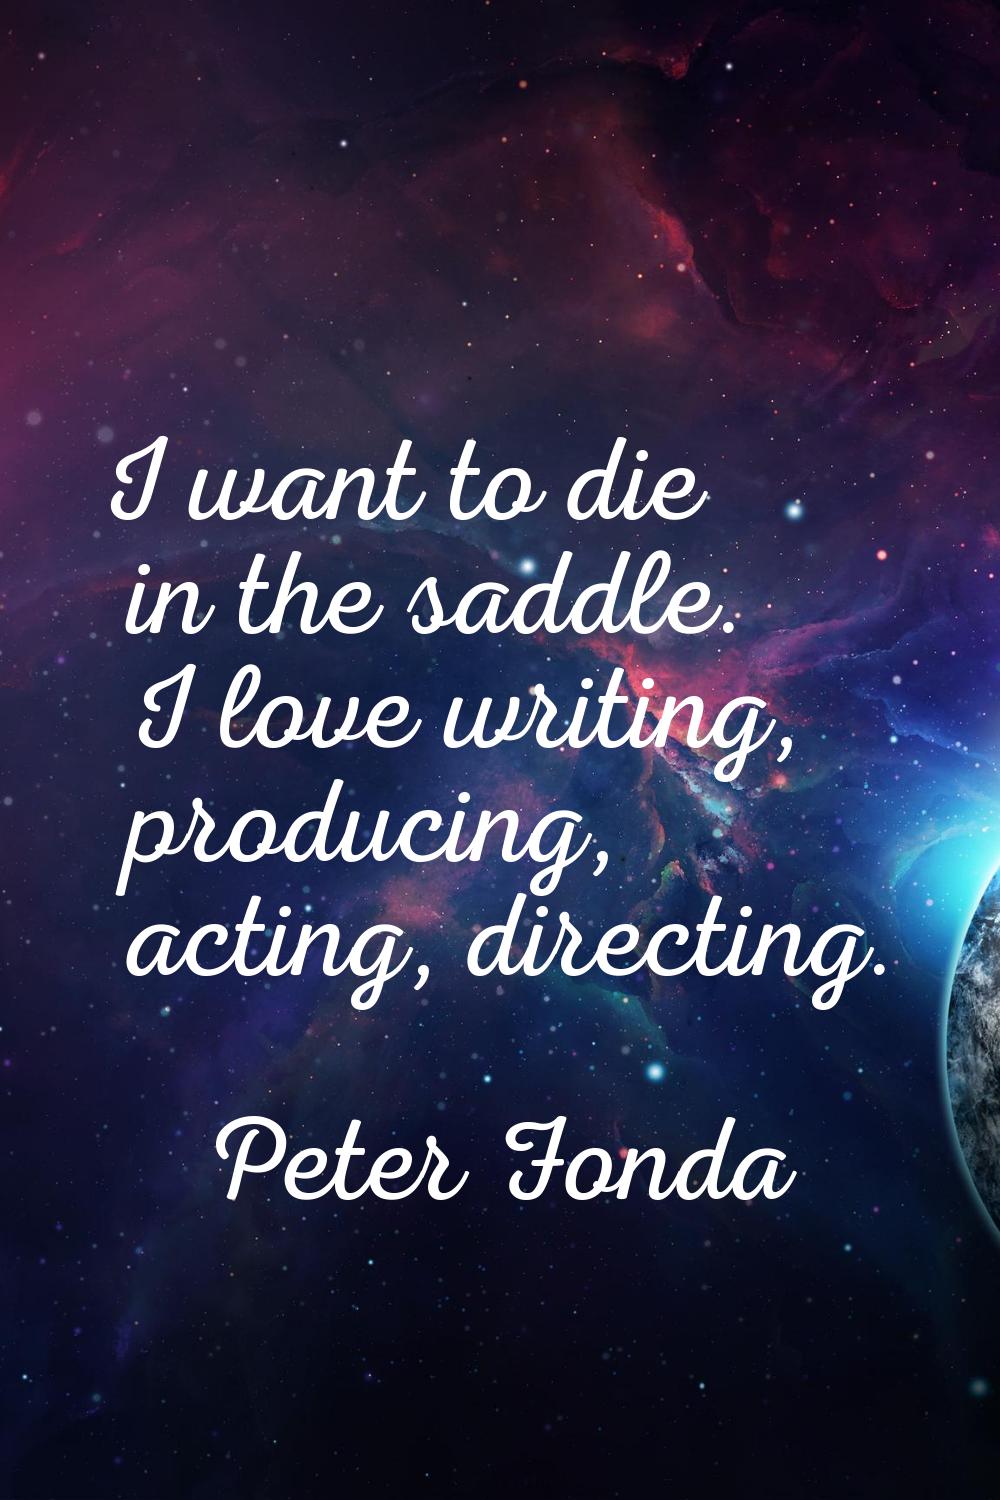 I want to die in the saddle. I love writing, producing, acting, directing.